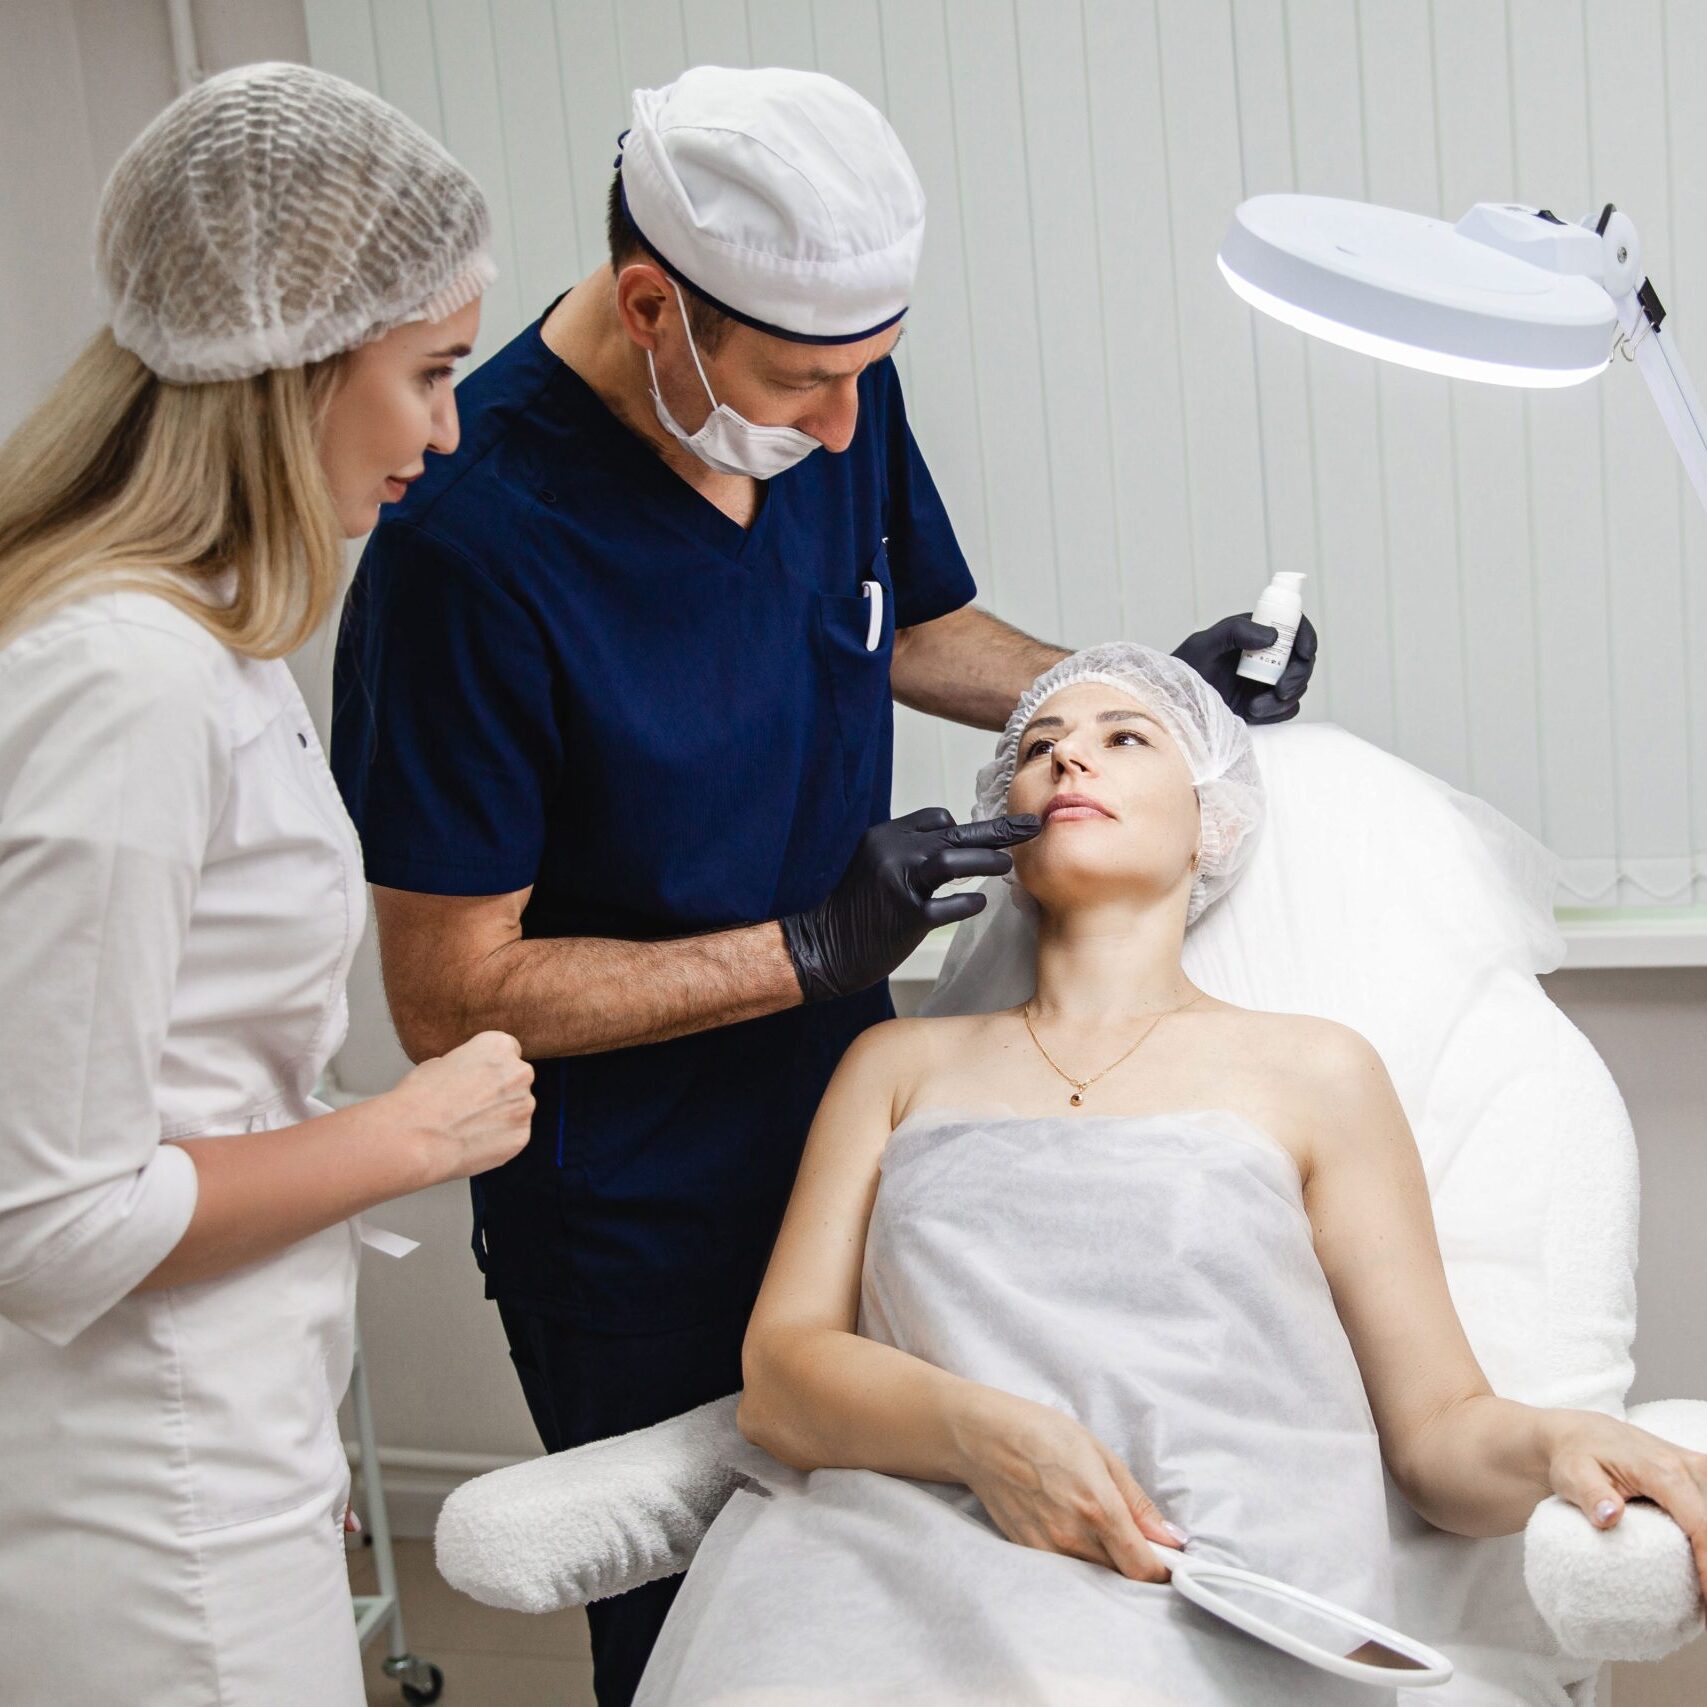 A man doctor together with a girl assistant examine the patient's woman before a lip augmentation procedure in a cosmetology clinic. High quality photo